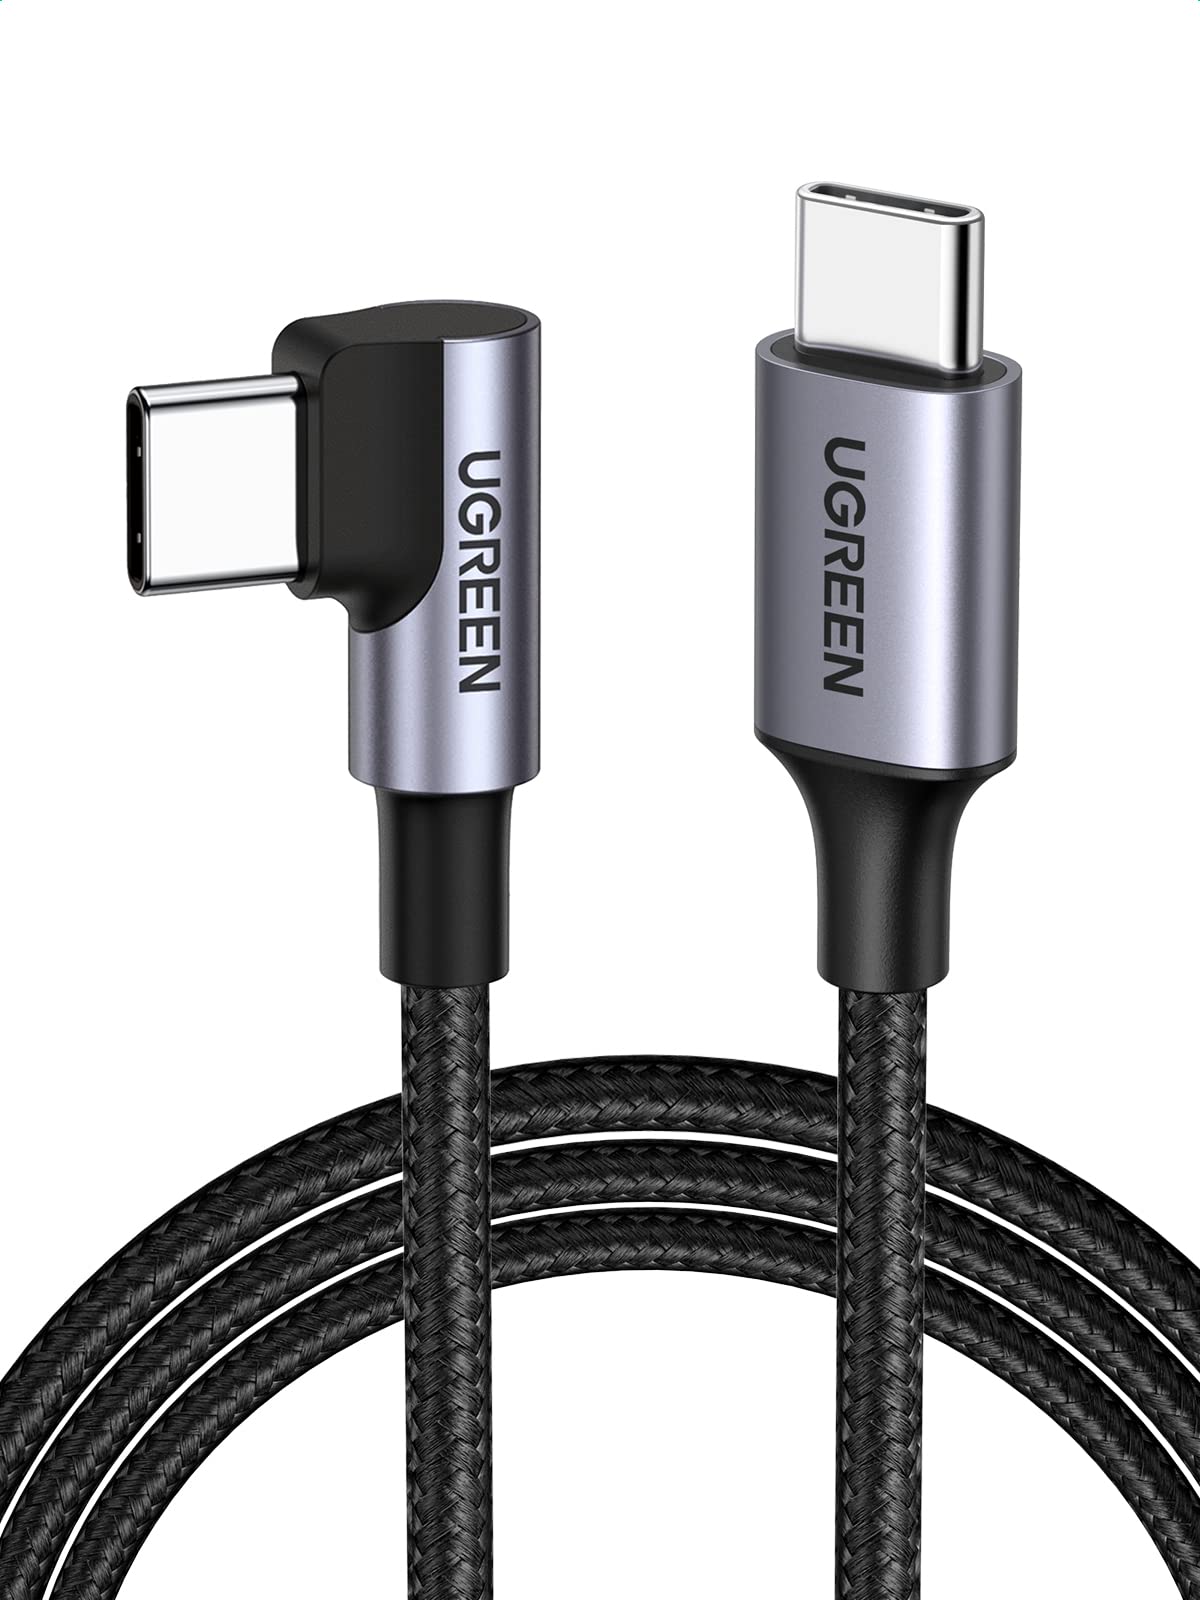 UGREEN USB C to USB C Cable Right Angle 90 Degree USB Type C Fast Charging Cord for MacBook Pro, PS5 Controller, Galaxy S21 S10 A51 A71 iPad Air Gen4，iPad Mini 6, Google Pixel 5 4A XL, 6 Feet